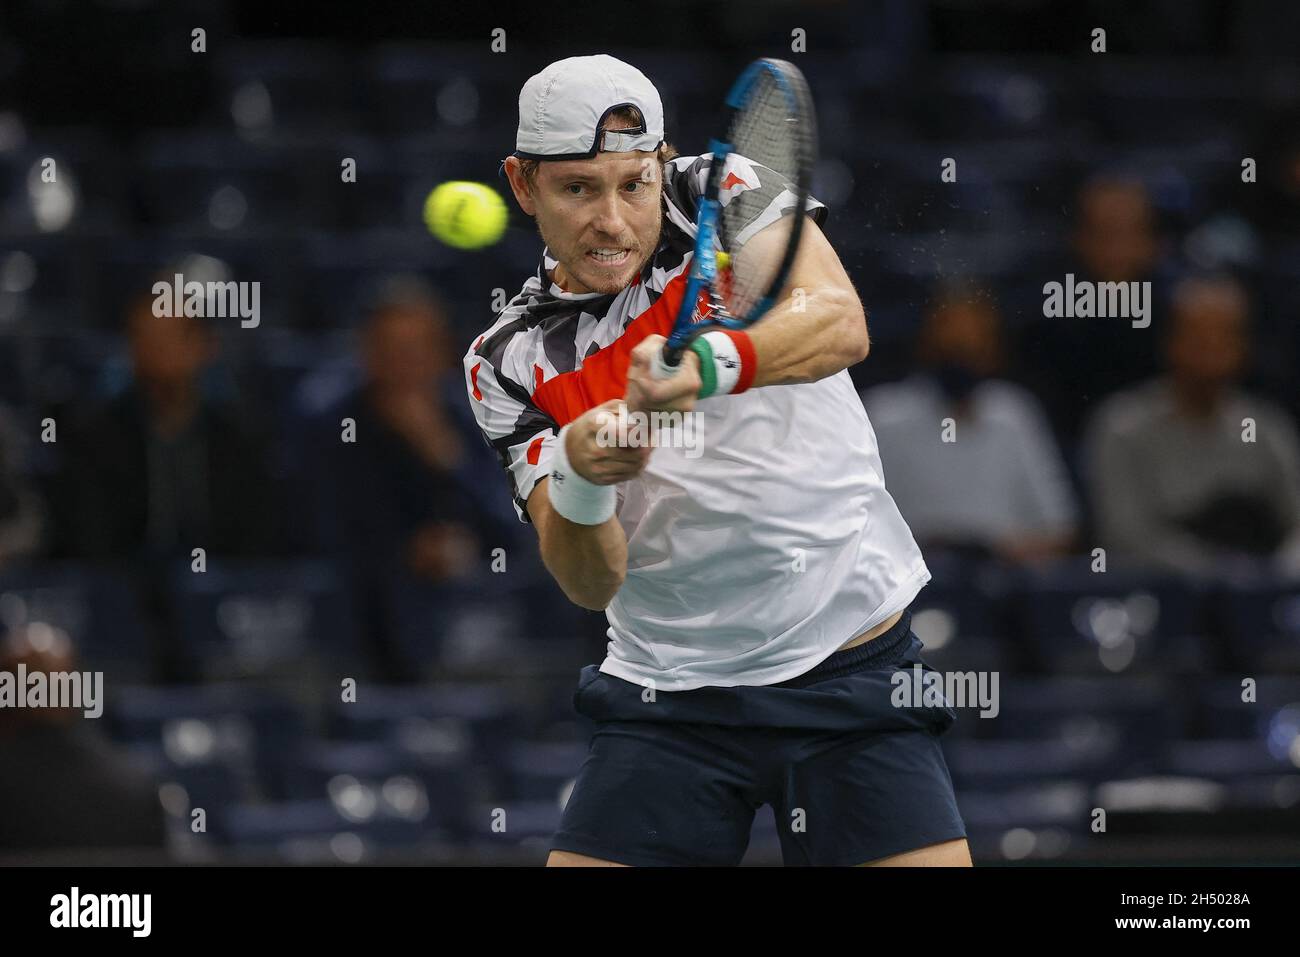 Paris, France. 05th Nov, 2021. James Duckworth (AUS) In action during the Rolex  Paris Masters 2021, match between James Duckworth (AUS) and Hubert Hurkacz  (POL), ATP Tennis Masters 1000, at the Accorhotels